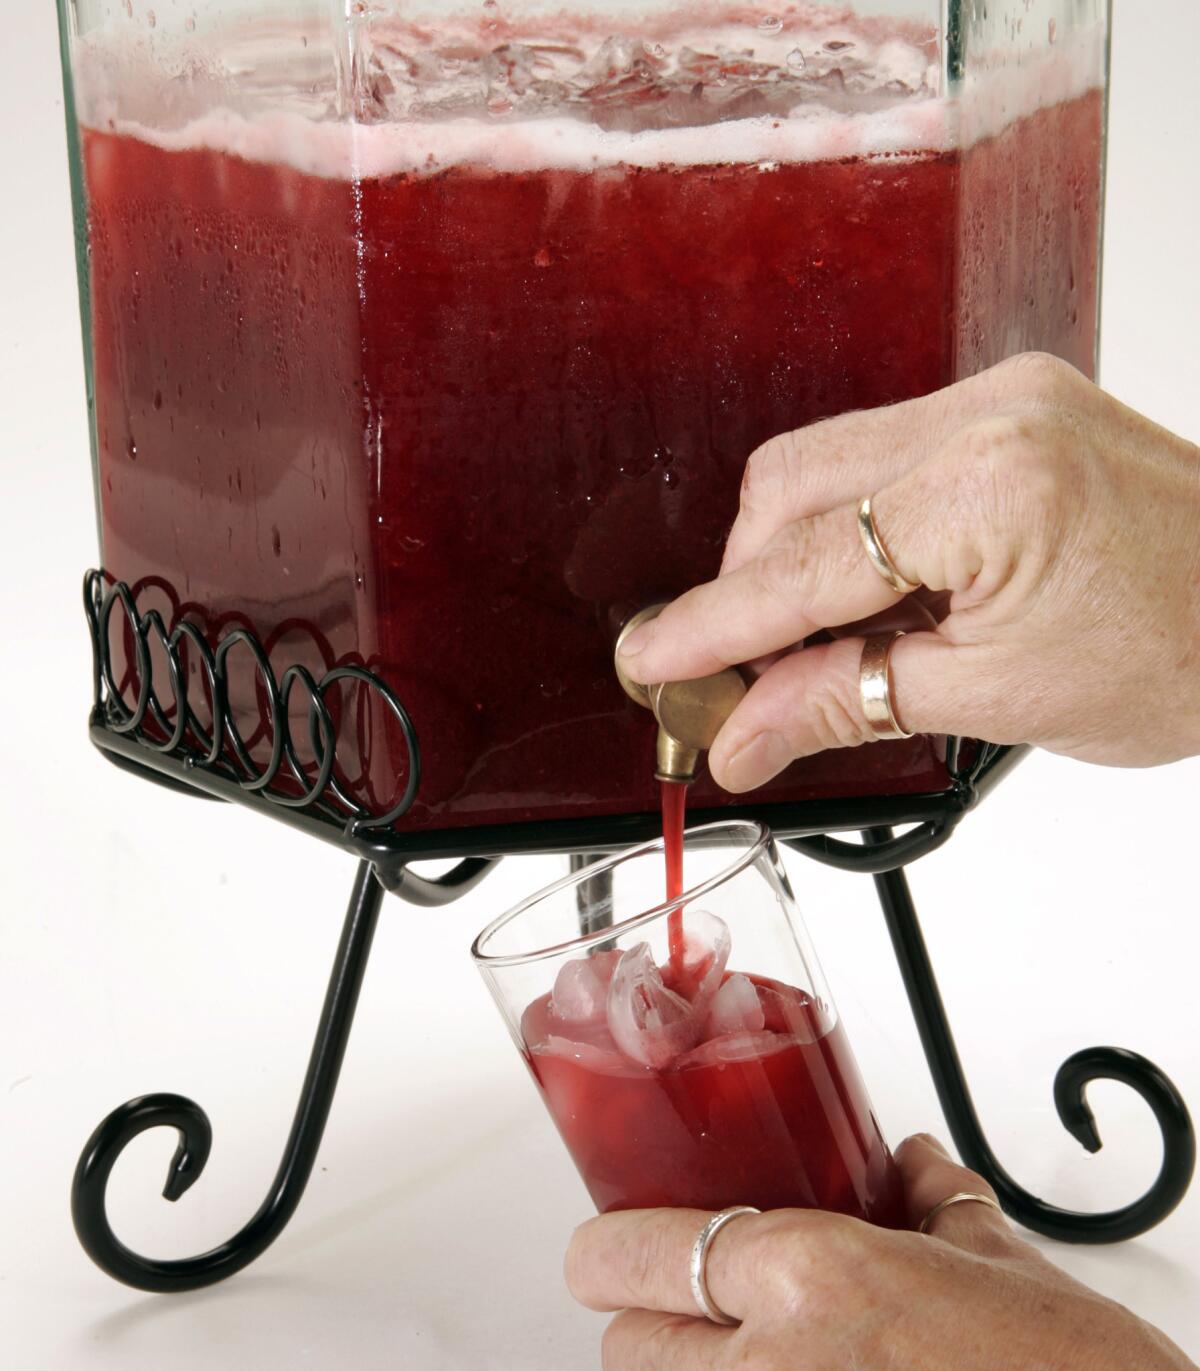 STRAWBERRY GOOD: Aguas frescas shouldn't have a lot of sugar -- theyre refreshing thirst-quenchers, not sweet drinks.